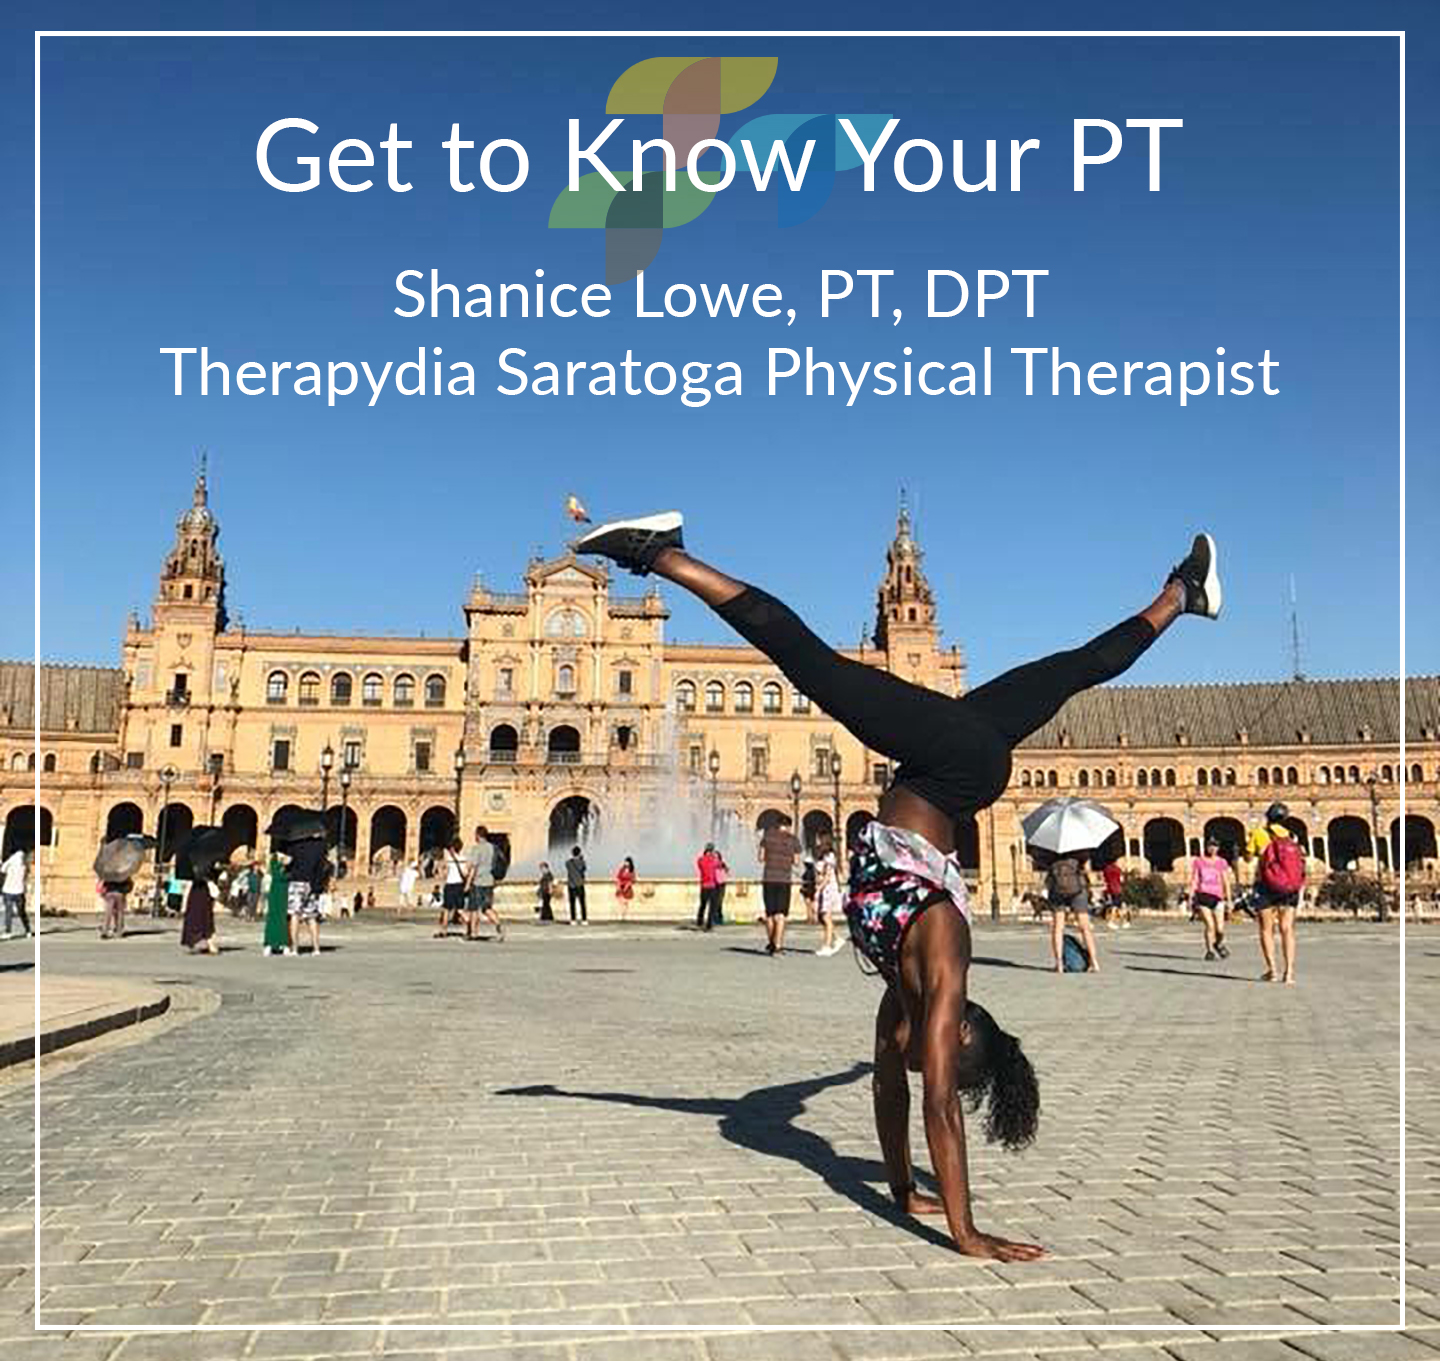 Get to Know Your PT – Shanice Lowe, Therapydia Saratoga